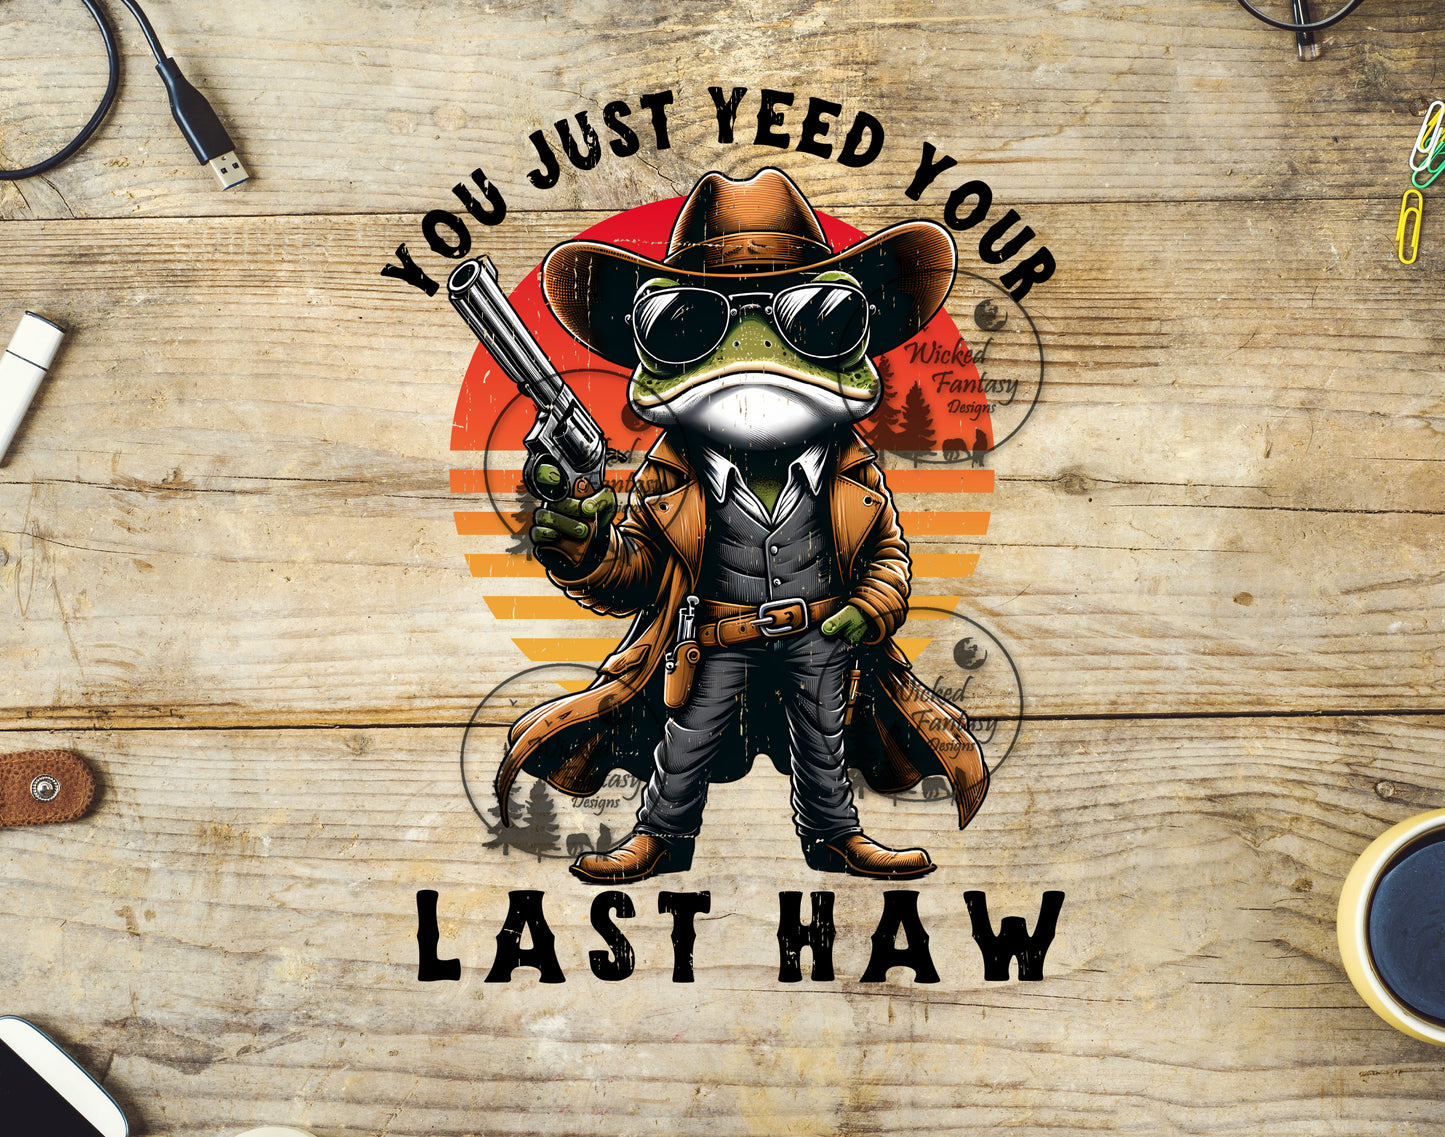 UVDTF You Just Yeed Your Last Haw Funny Sarcastic